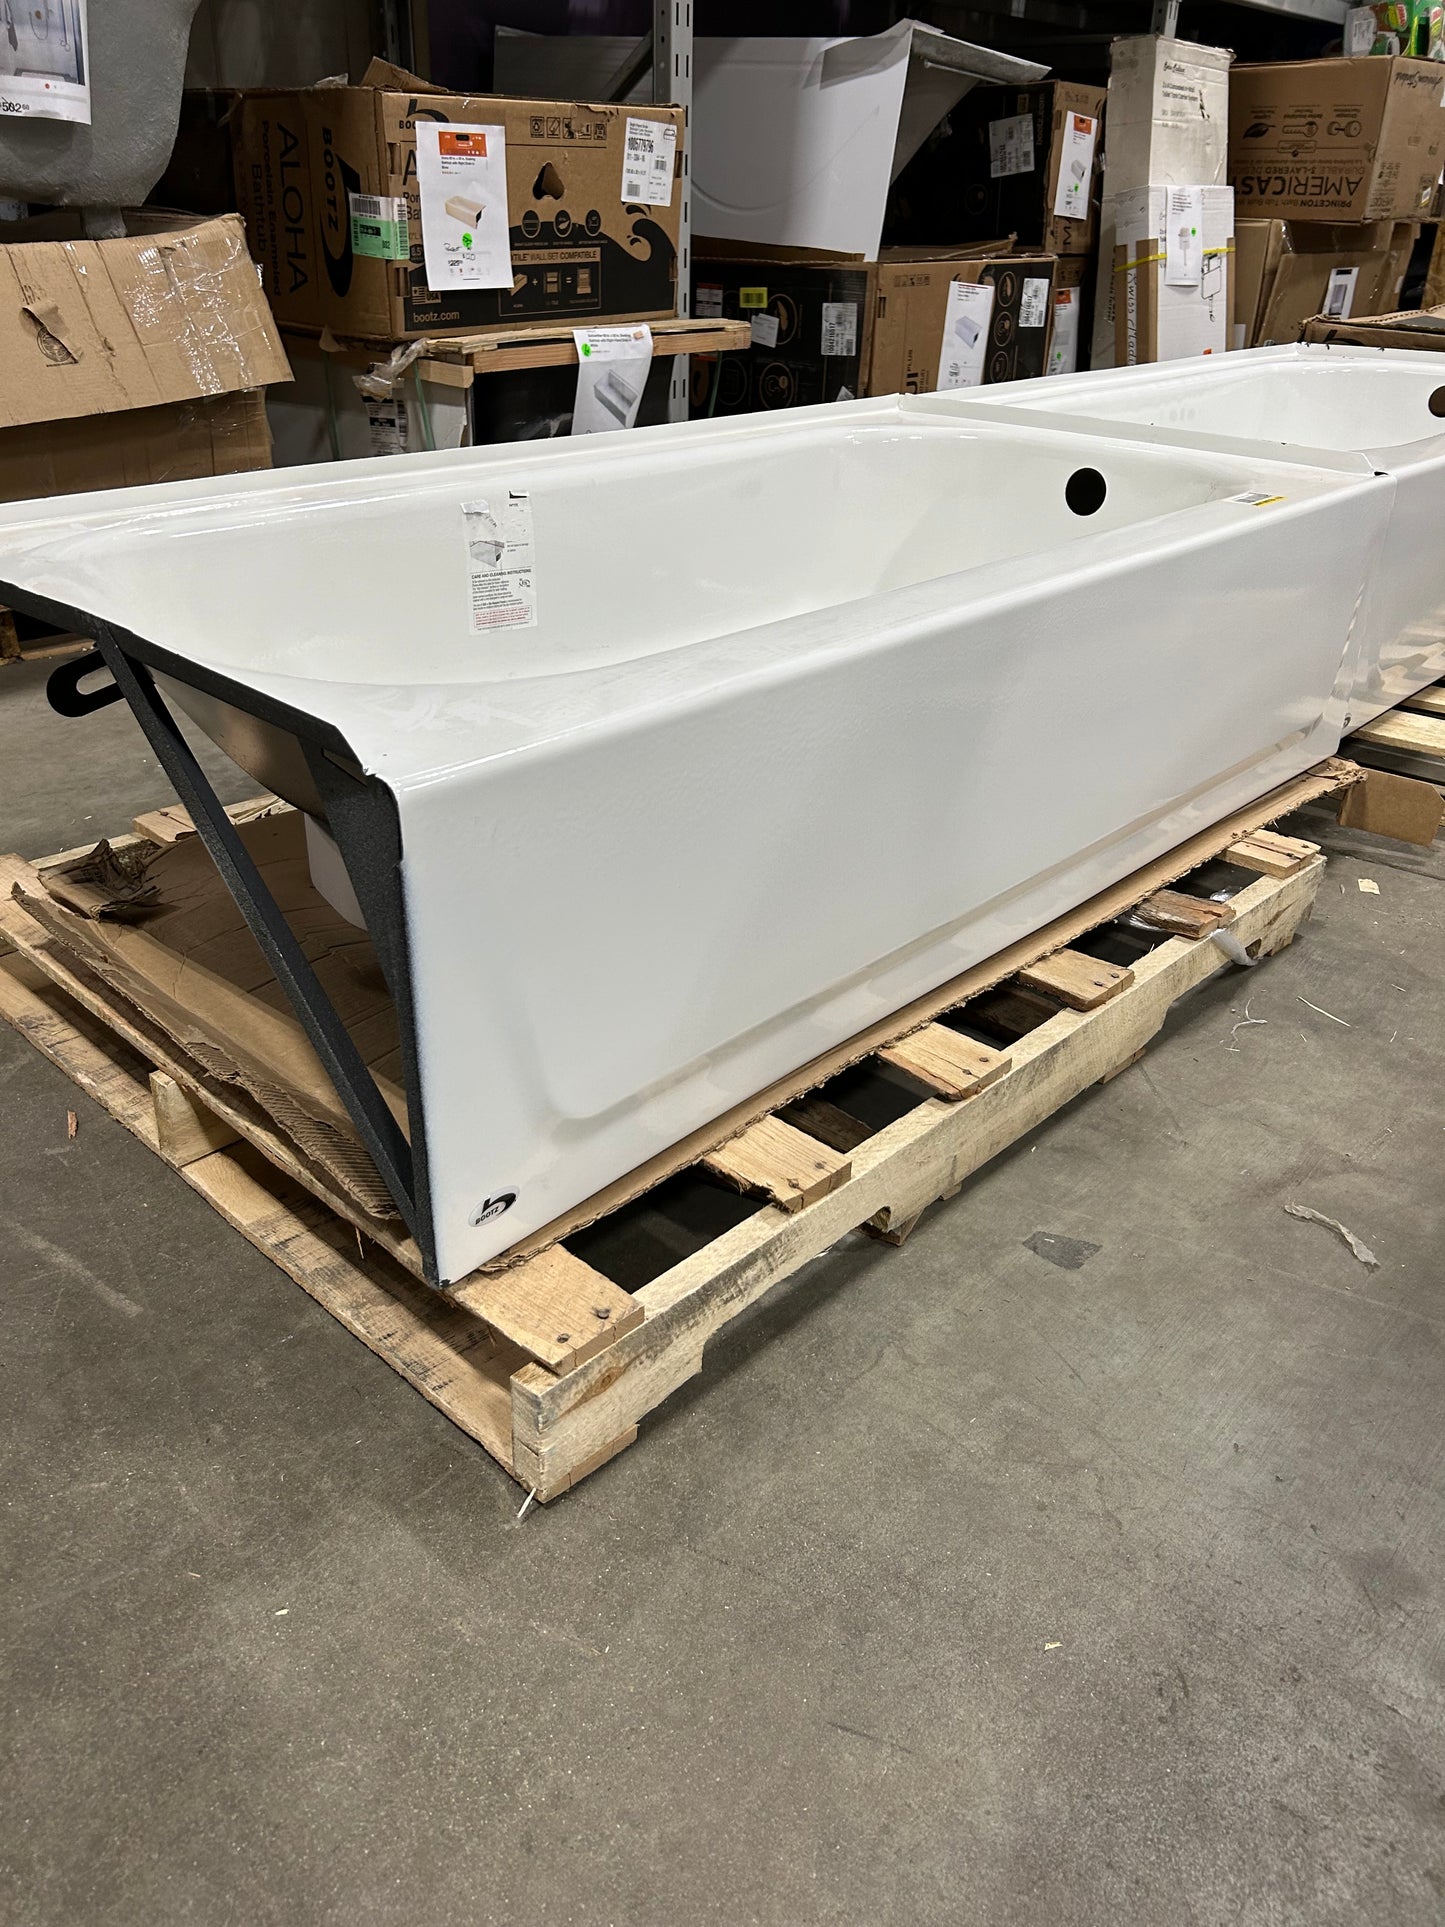 Aloha 60 in. x 30 in. Soaking Bathtub with Right Drain in White (Damaged)